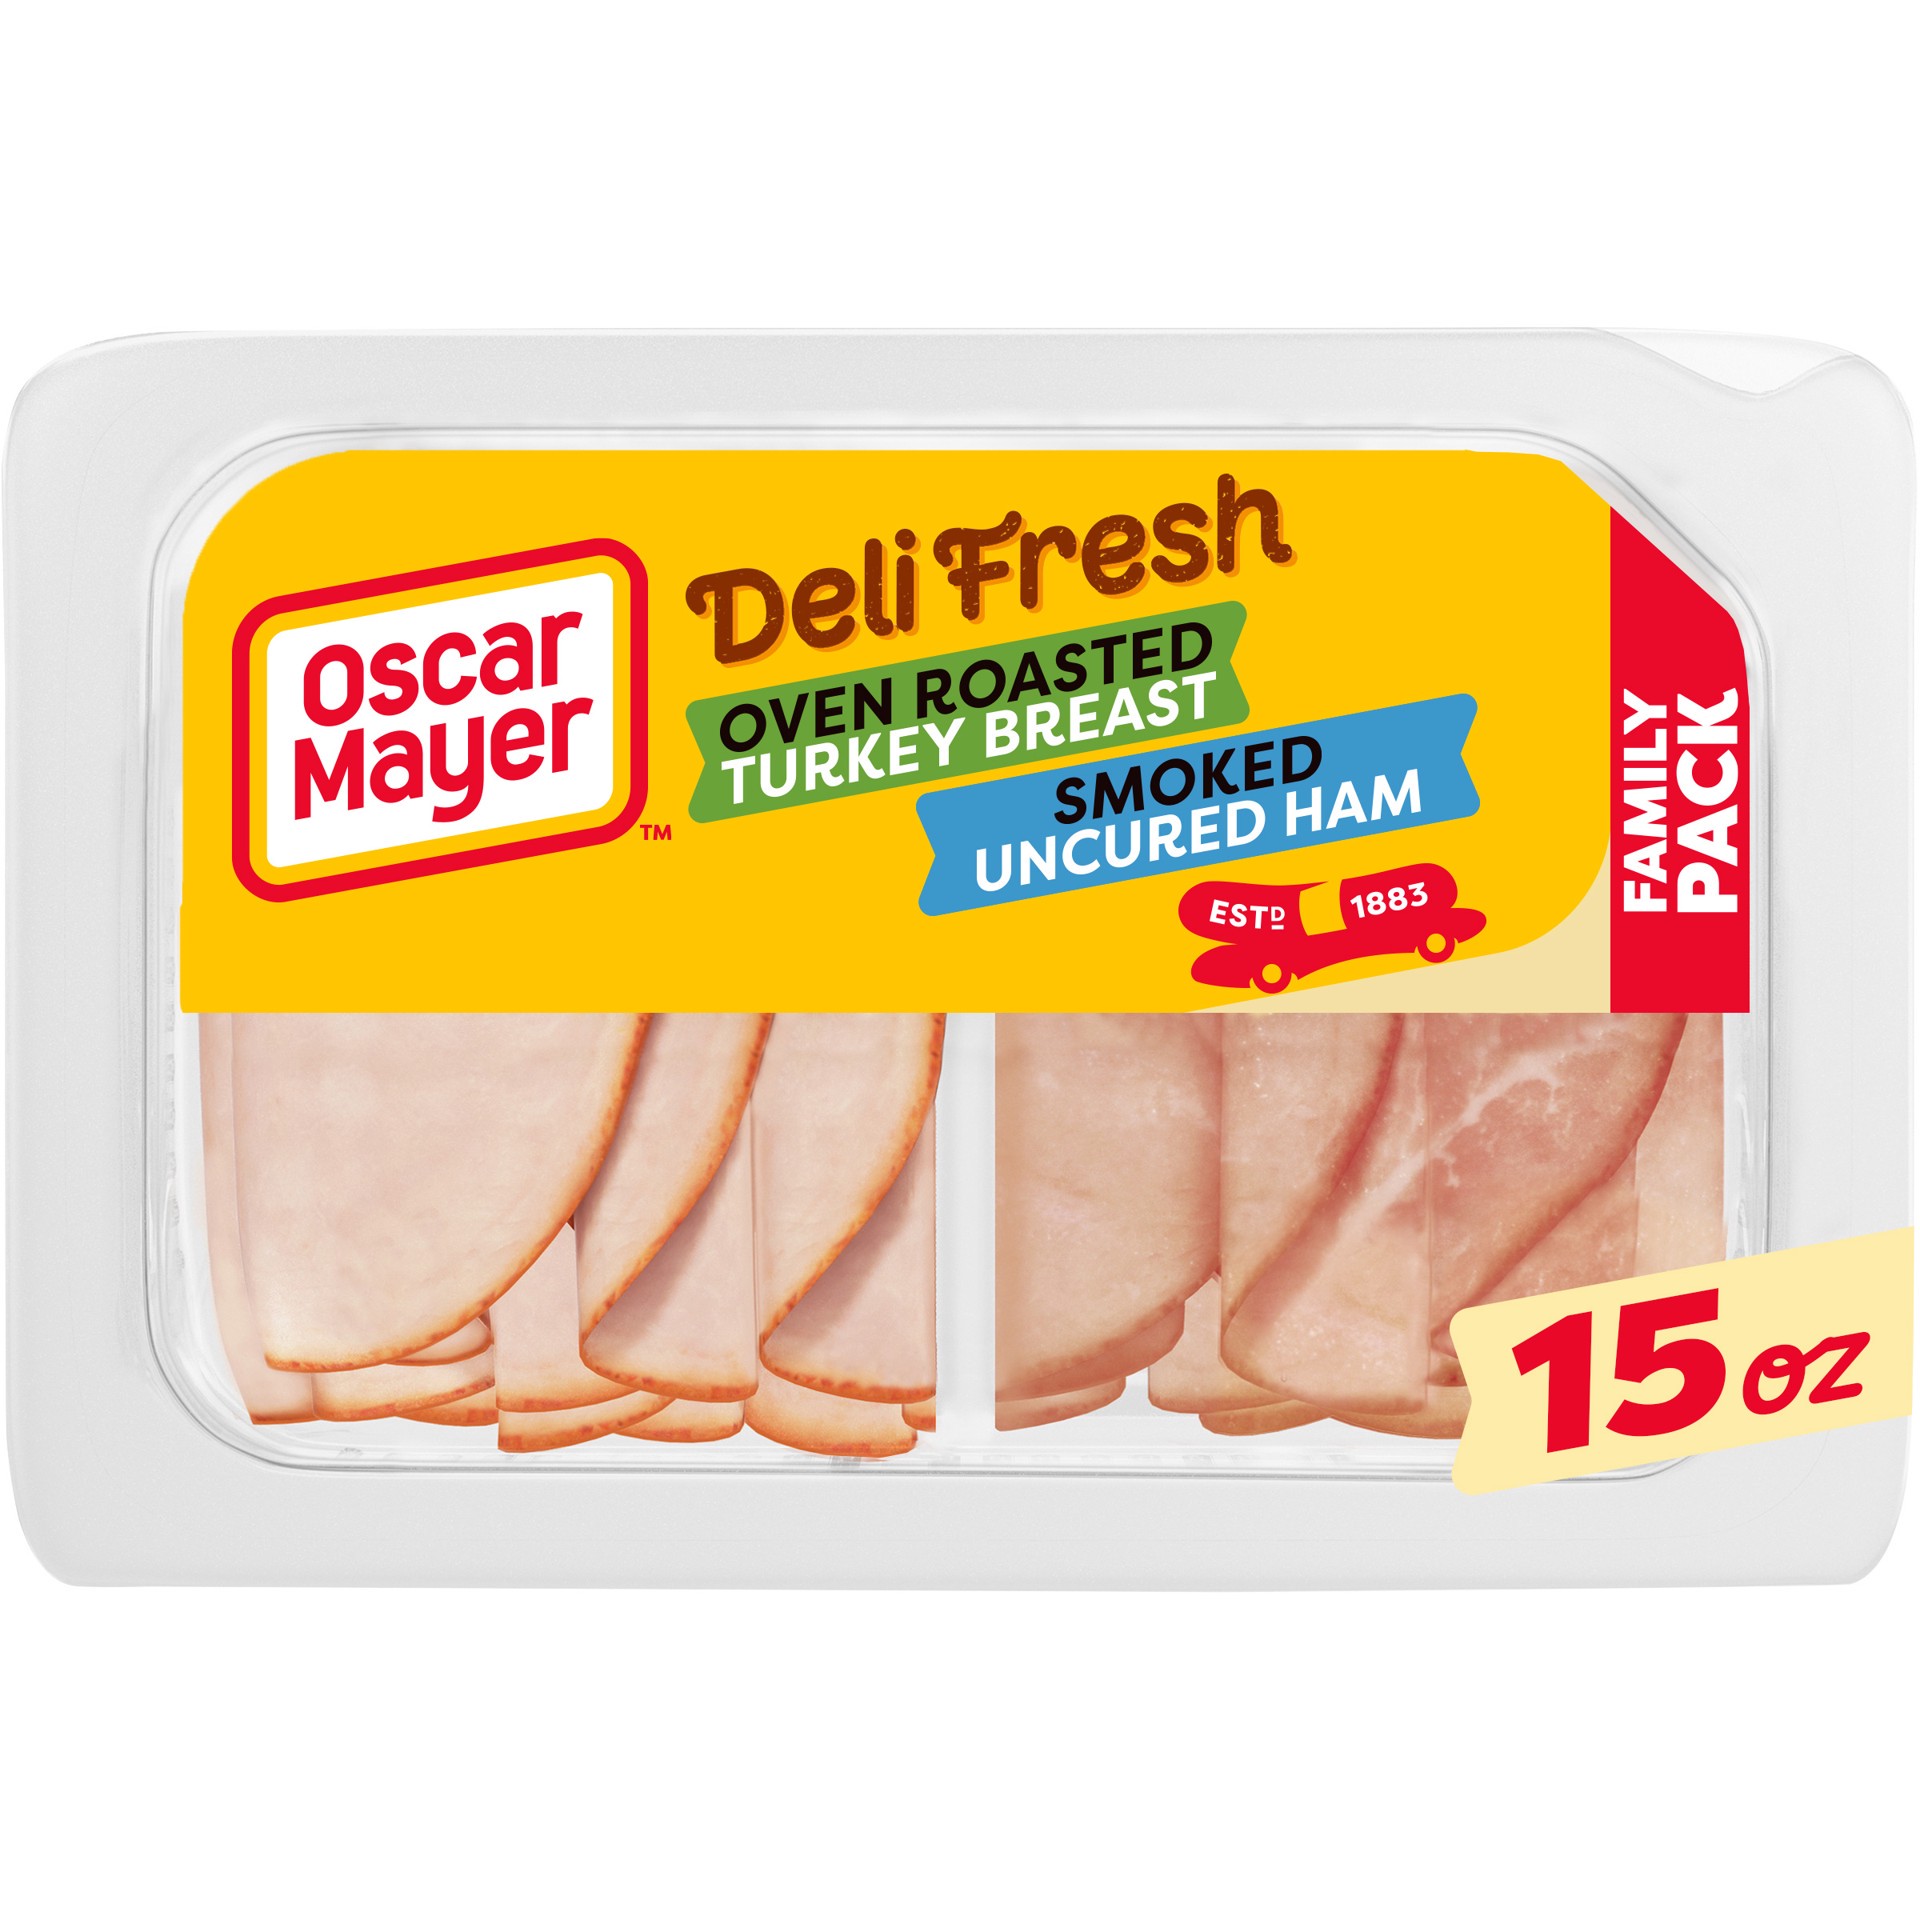 slide 1 of 9, Oscar Mayer Deli Fresh Oven Roasted Turkey Breast & Smoked Uncured Sliced Ham Deli Lunch Meats Variety Pack Family Size, 15 oz. Tray, 15 oz